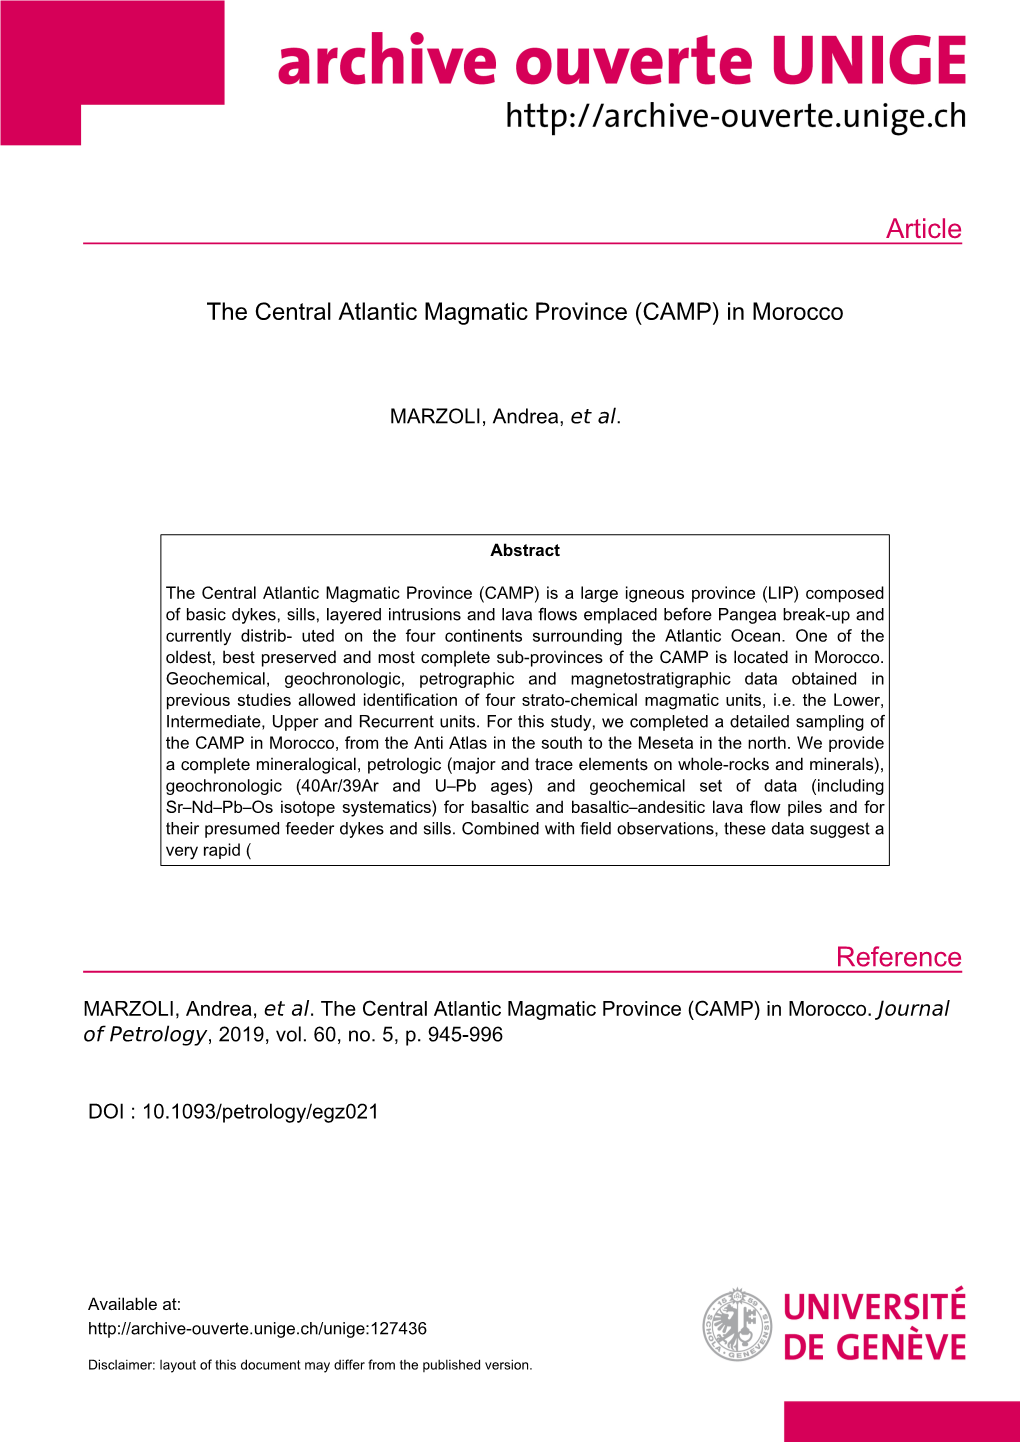 The Central Atlantic Magmatic Province (CAMP) in Morocco